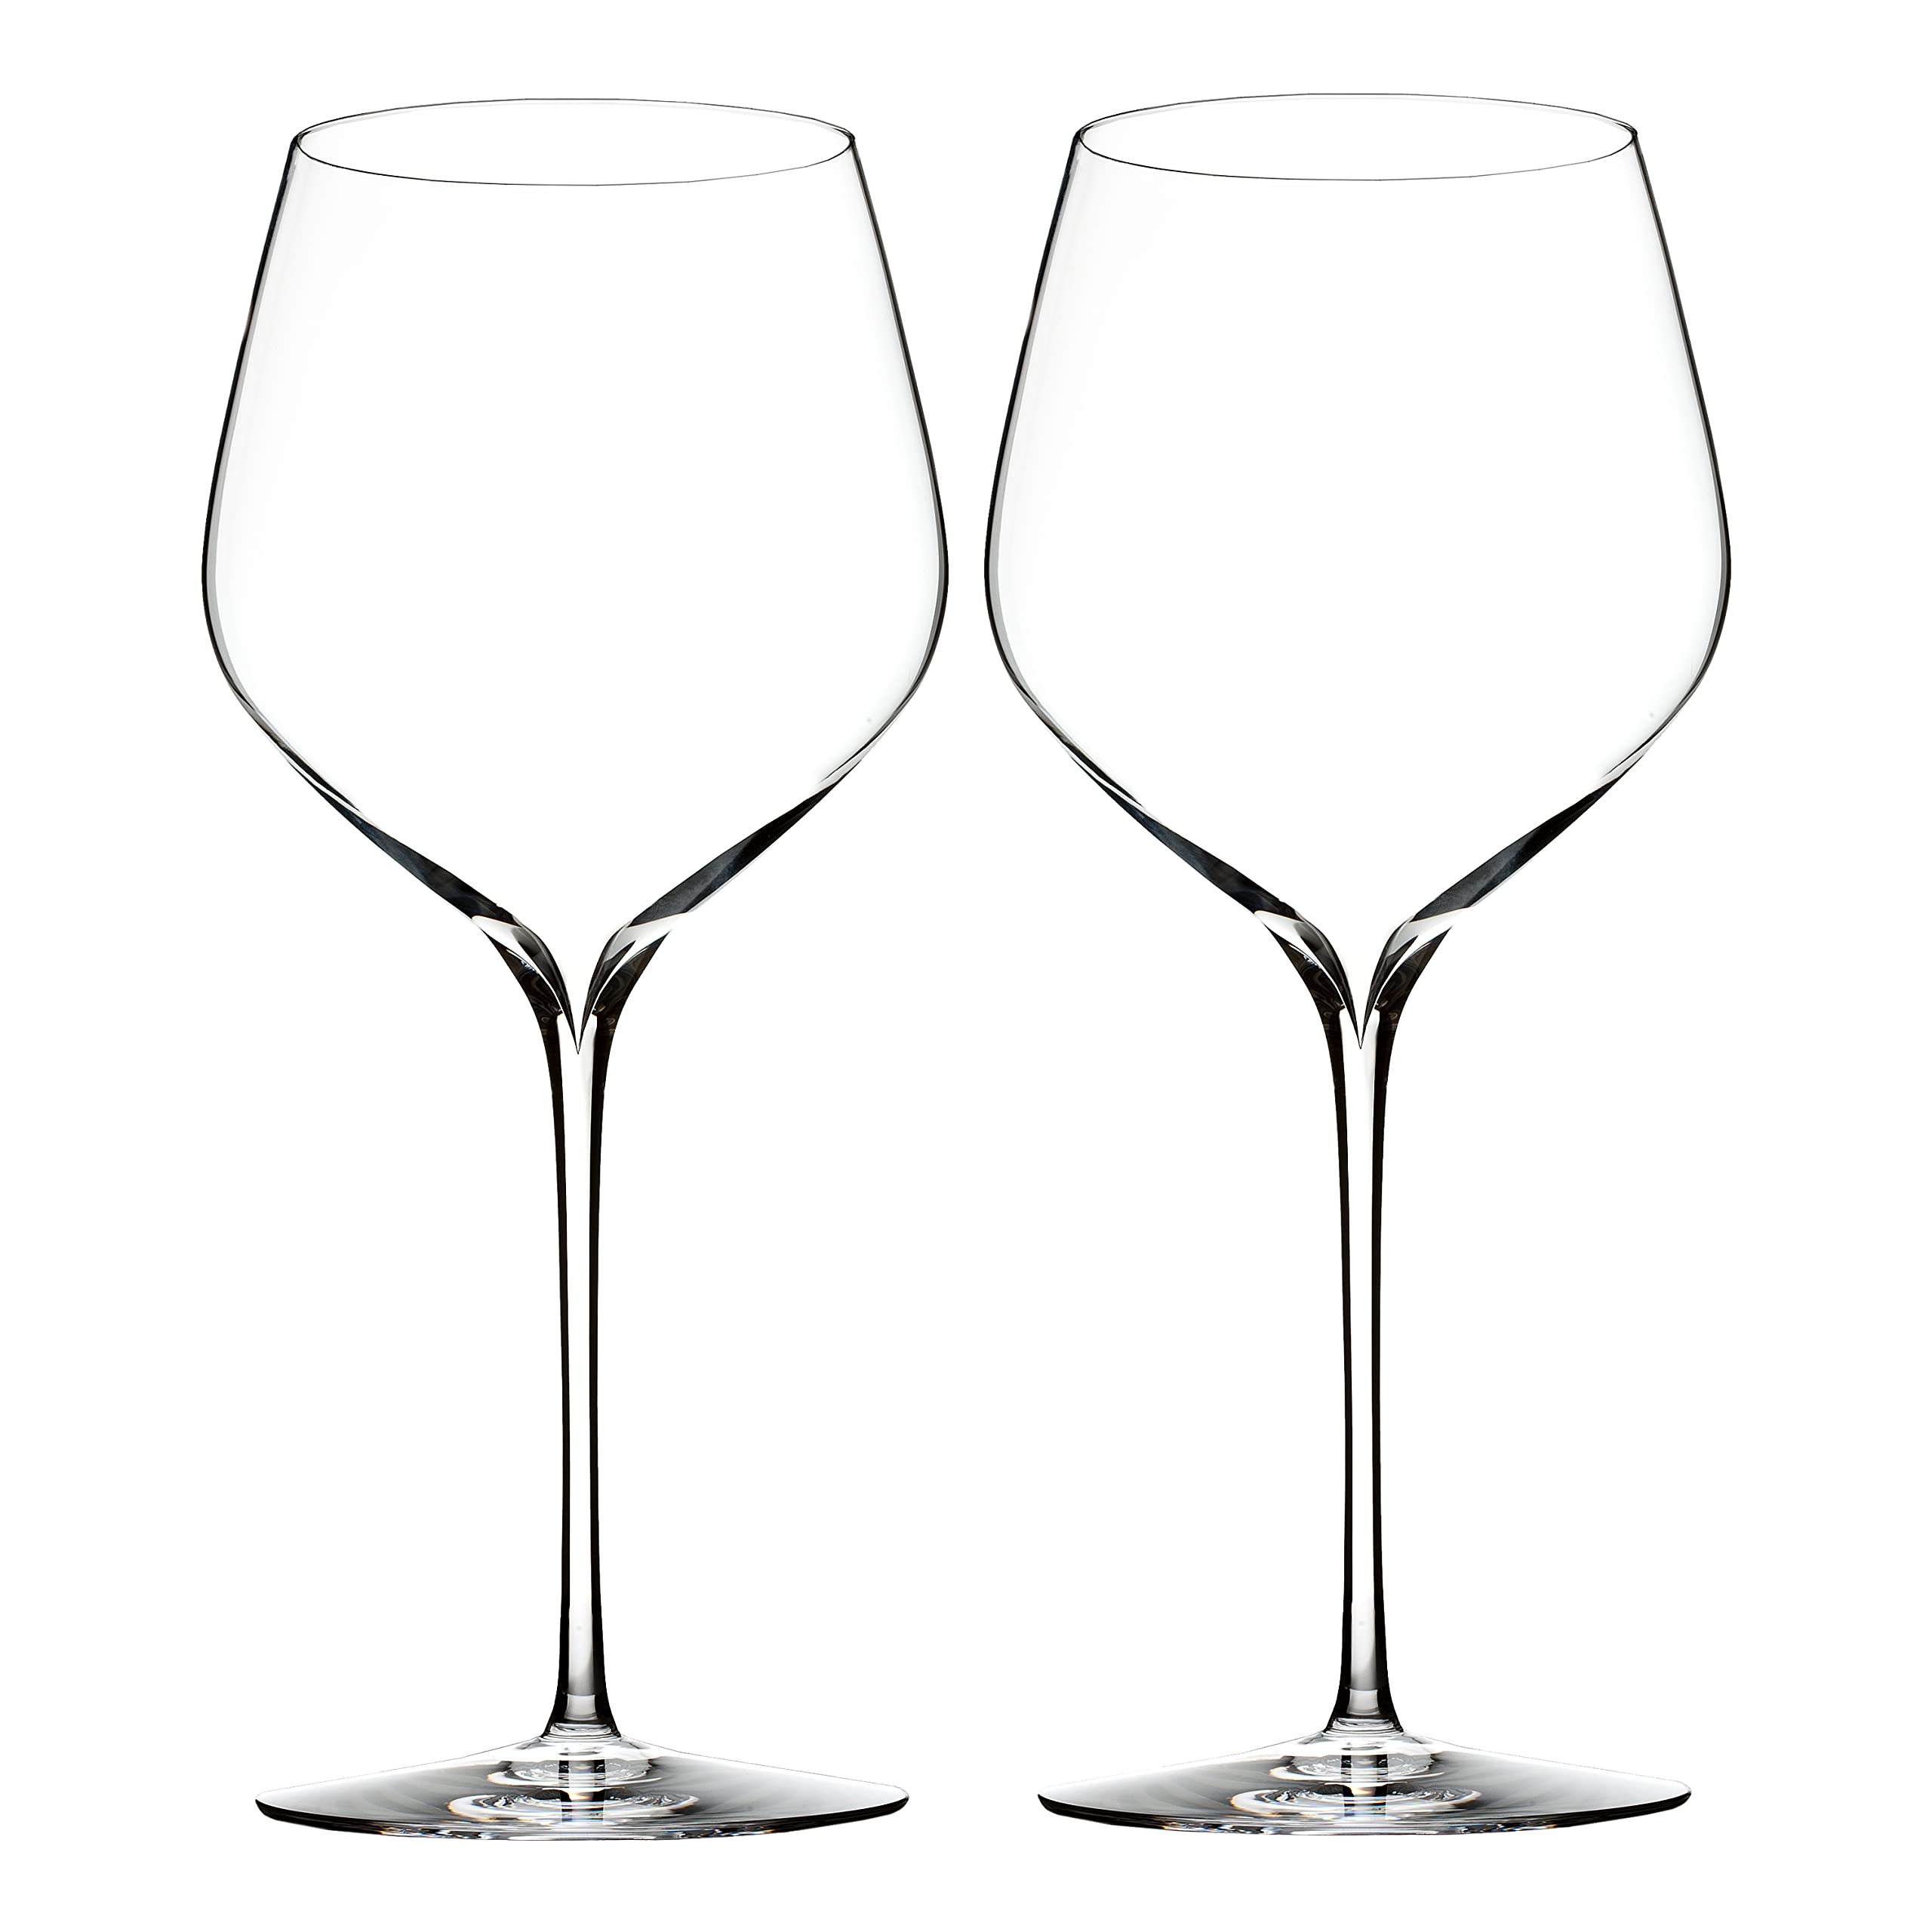 Waterford Personalized Elegance 26.7oz Cabernet Sauvignon Wine Glasses, Set of 2 Custom Engraved Crystal Red Wine Glasses for St. Emilion, Listrac, Moulis, Margaux and More